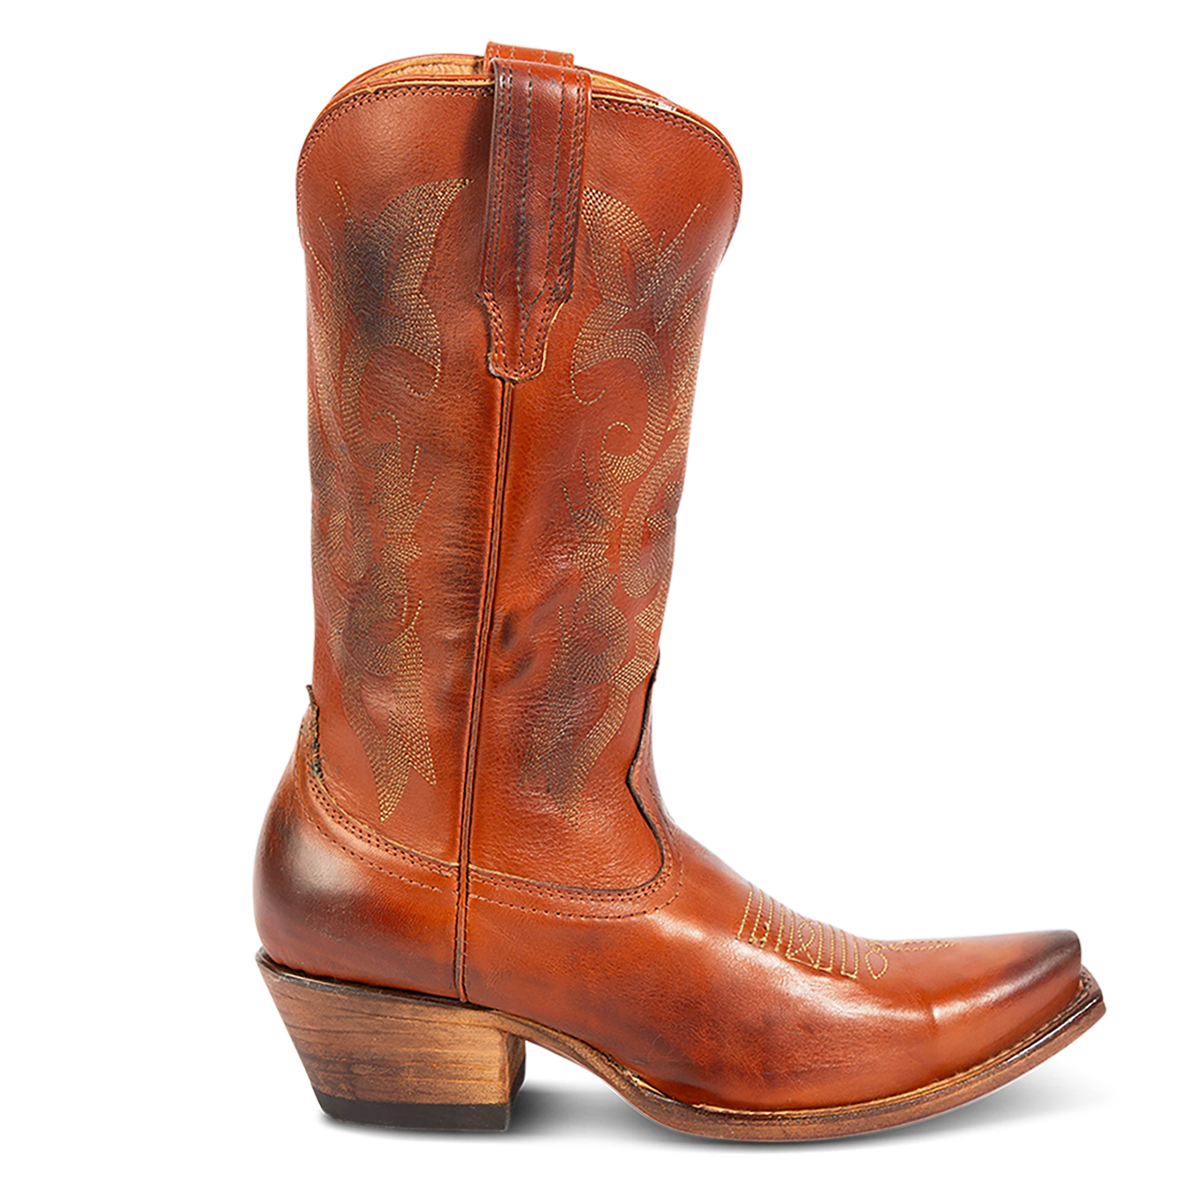 FREEBIRD women's Woody whiskey leather boot with stitch detailing and snip toe construction